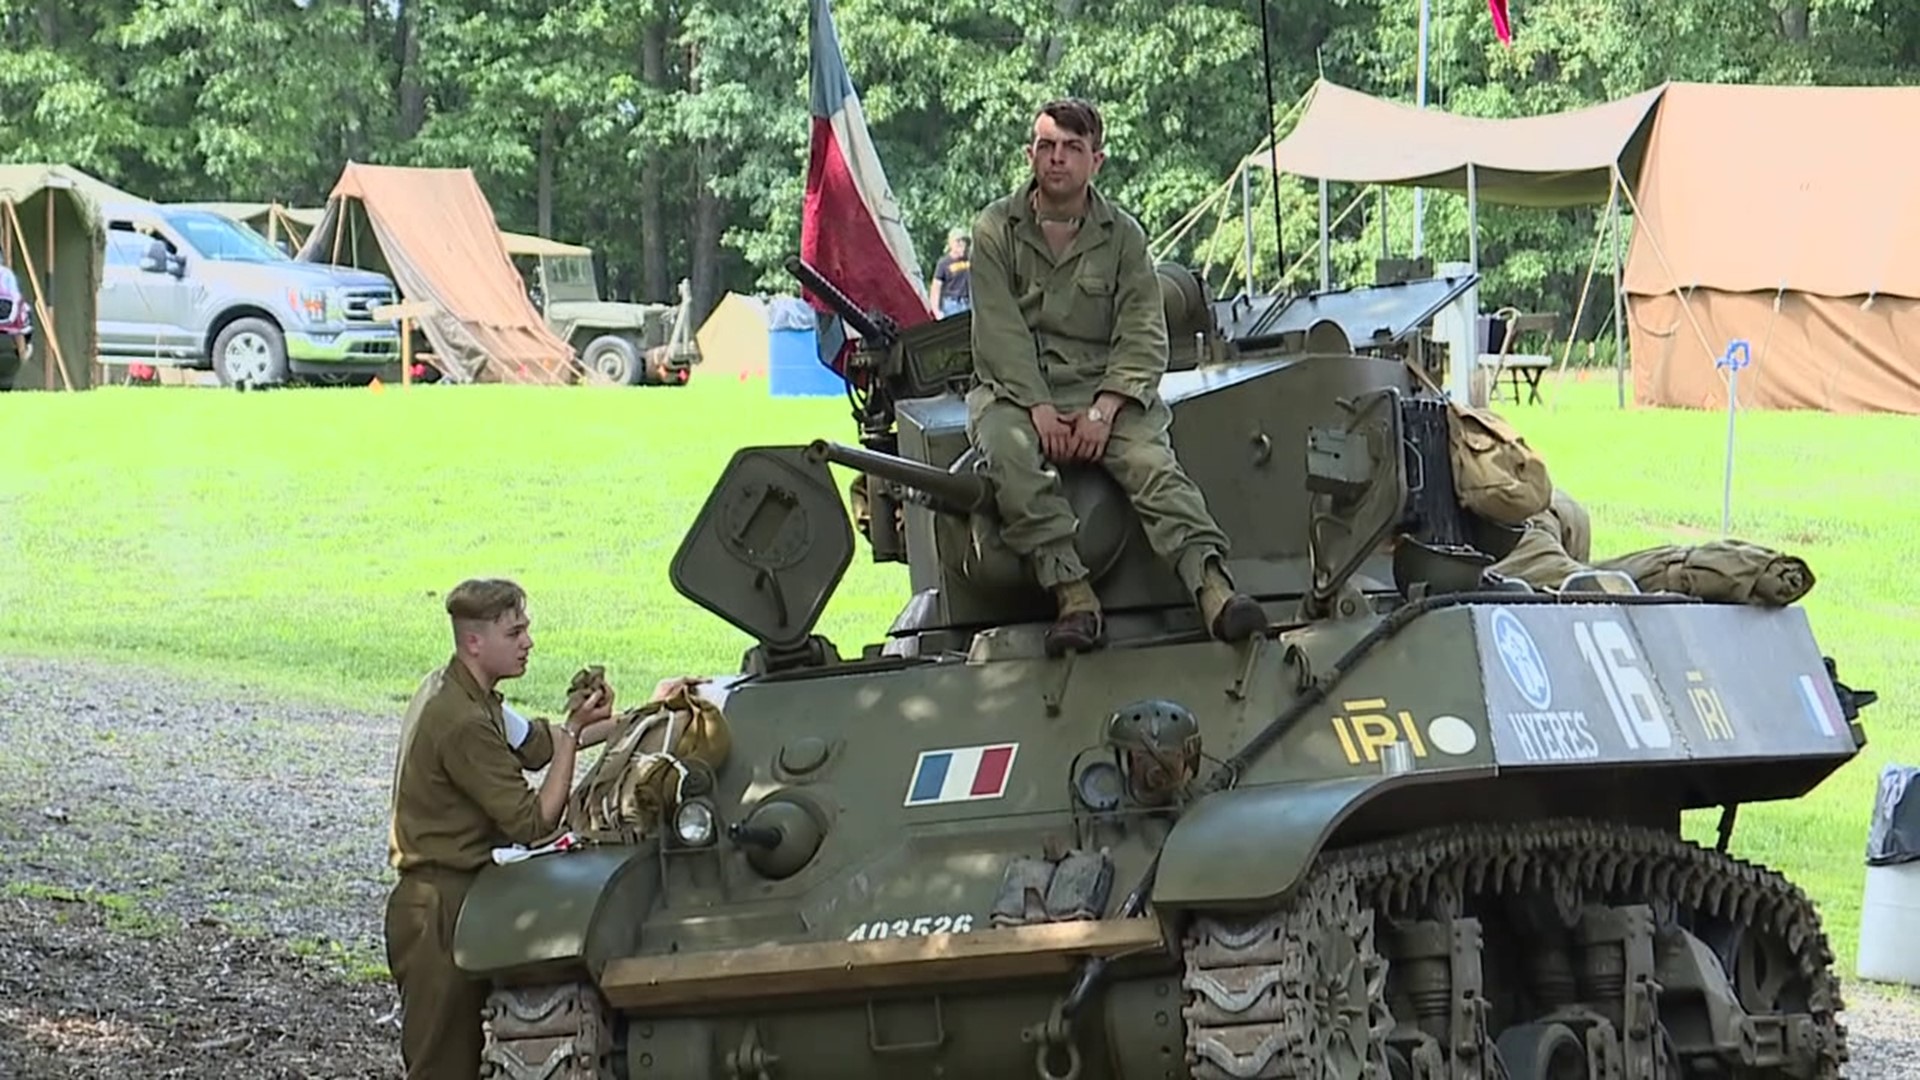 History is coming alive this weekend in Berwick as the community celebrates its World War II roots.